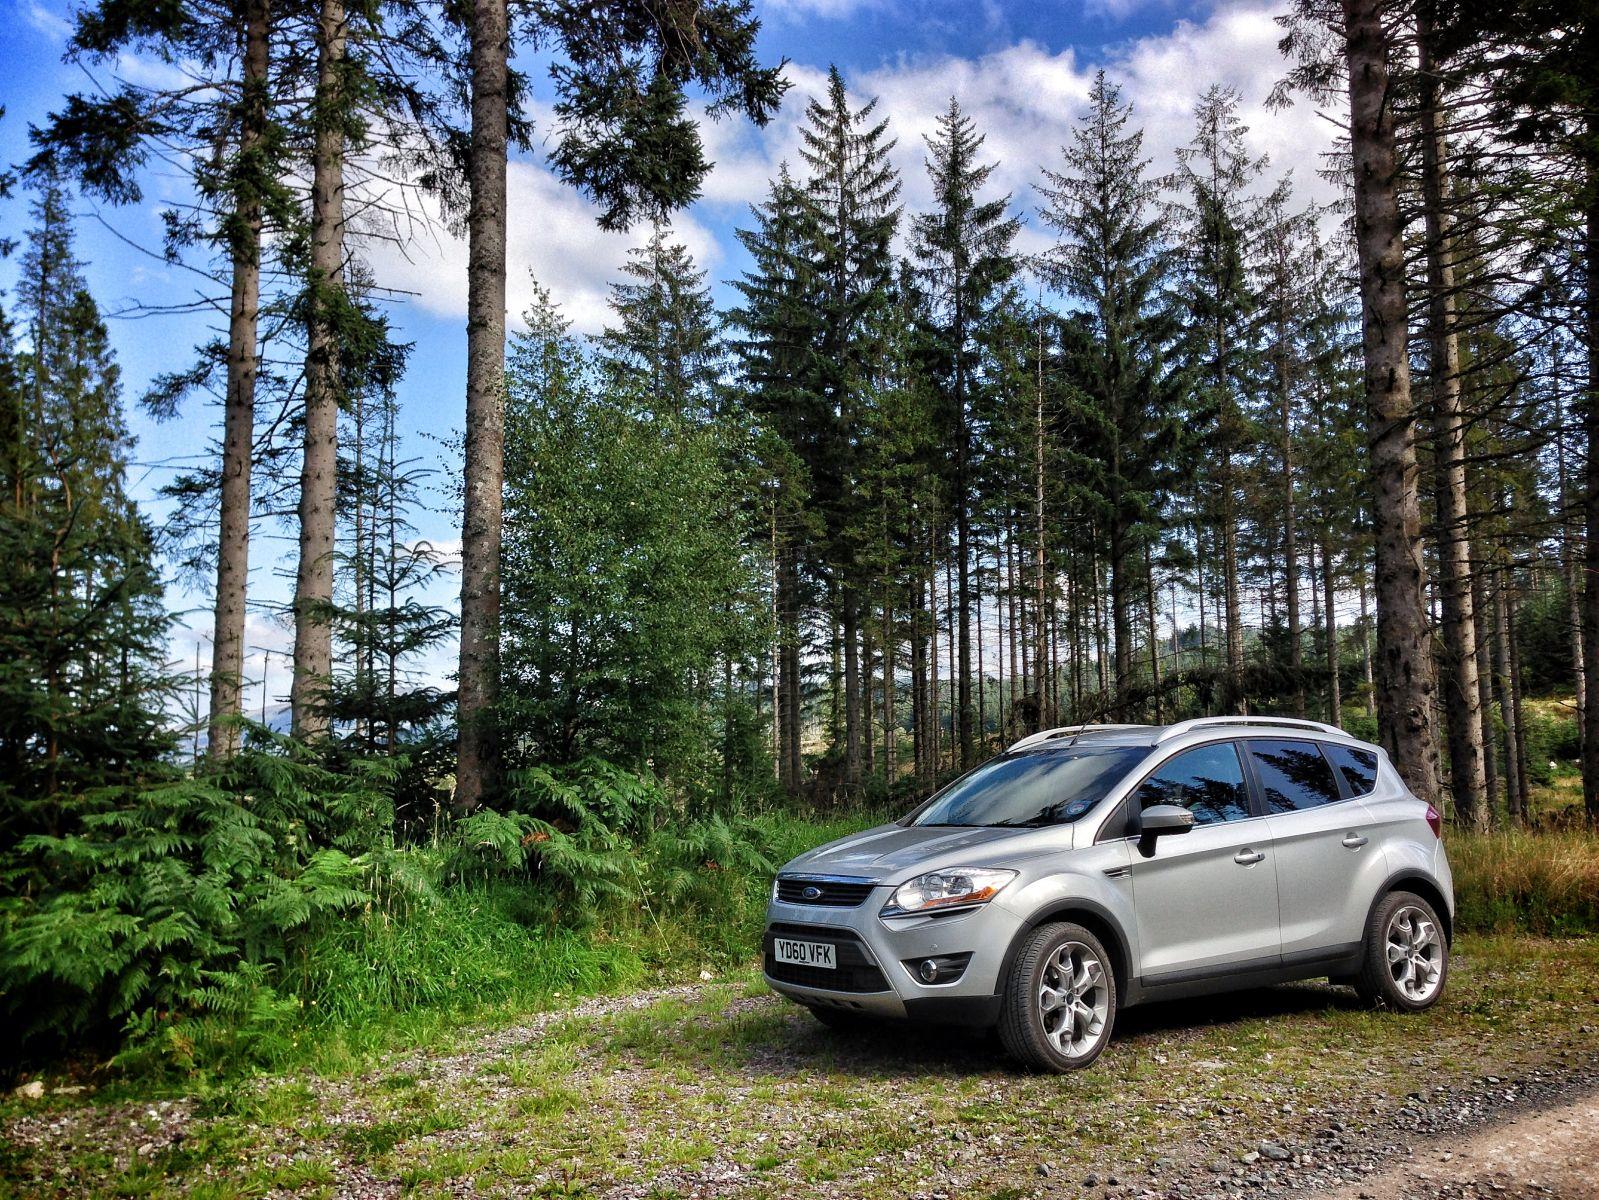 My Kuga on the Achray Forest Drive, Scotland